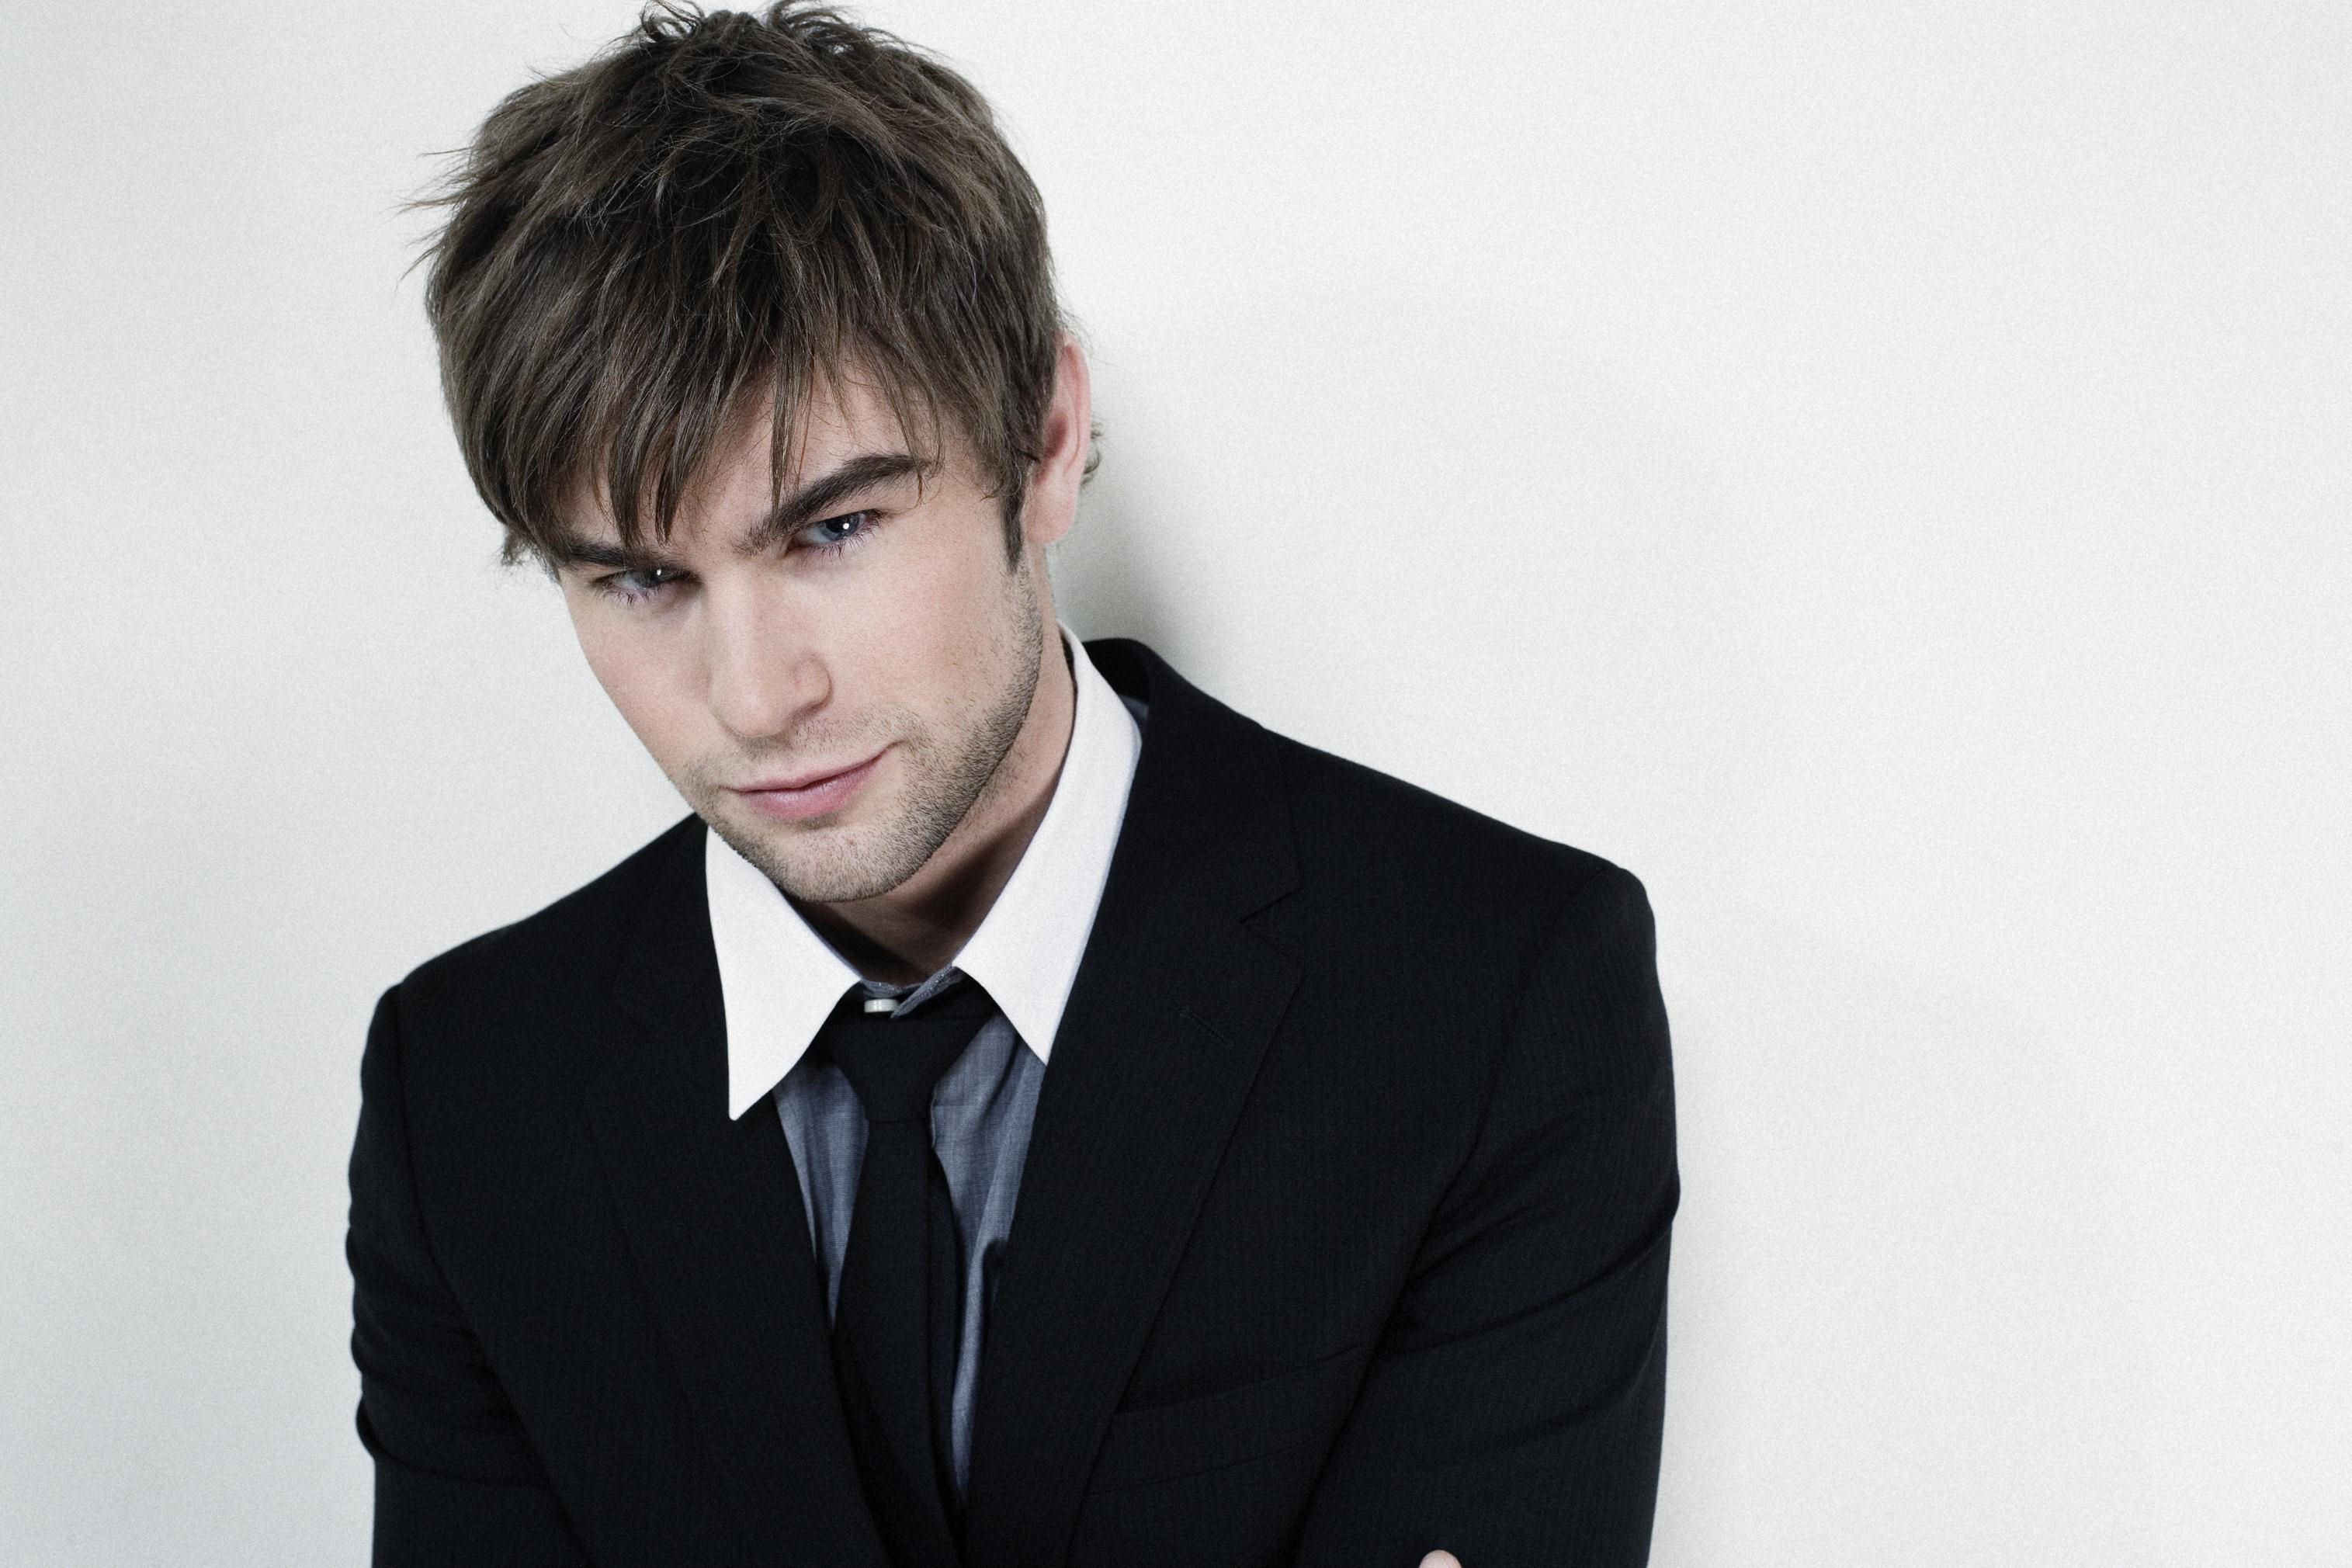 Chace Crawford: An American actor and a model who was born in Lubbock, Texas. 3030x2020 HD Wallpaper.